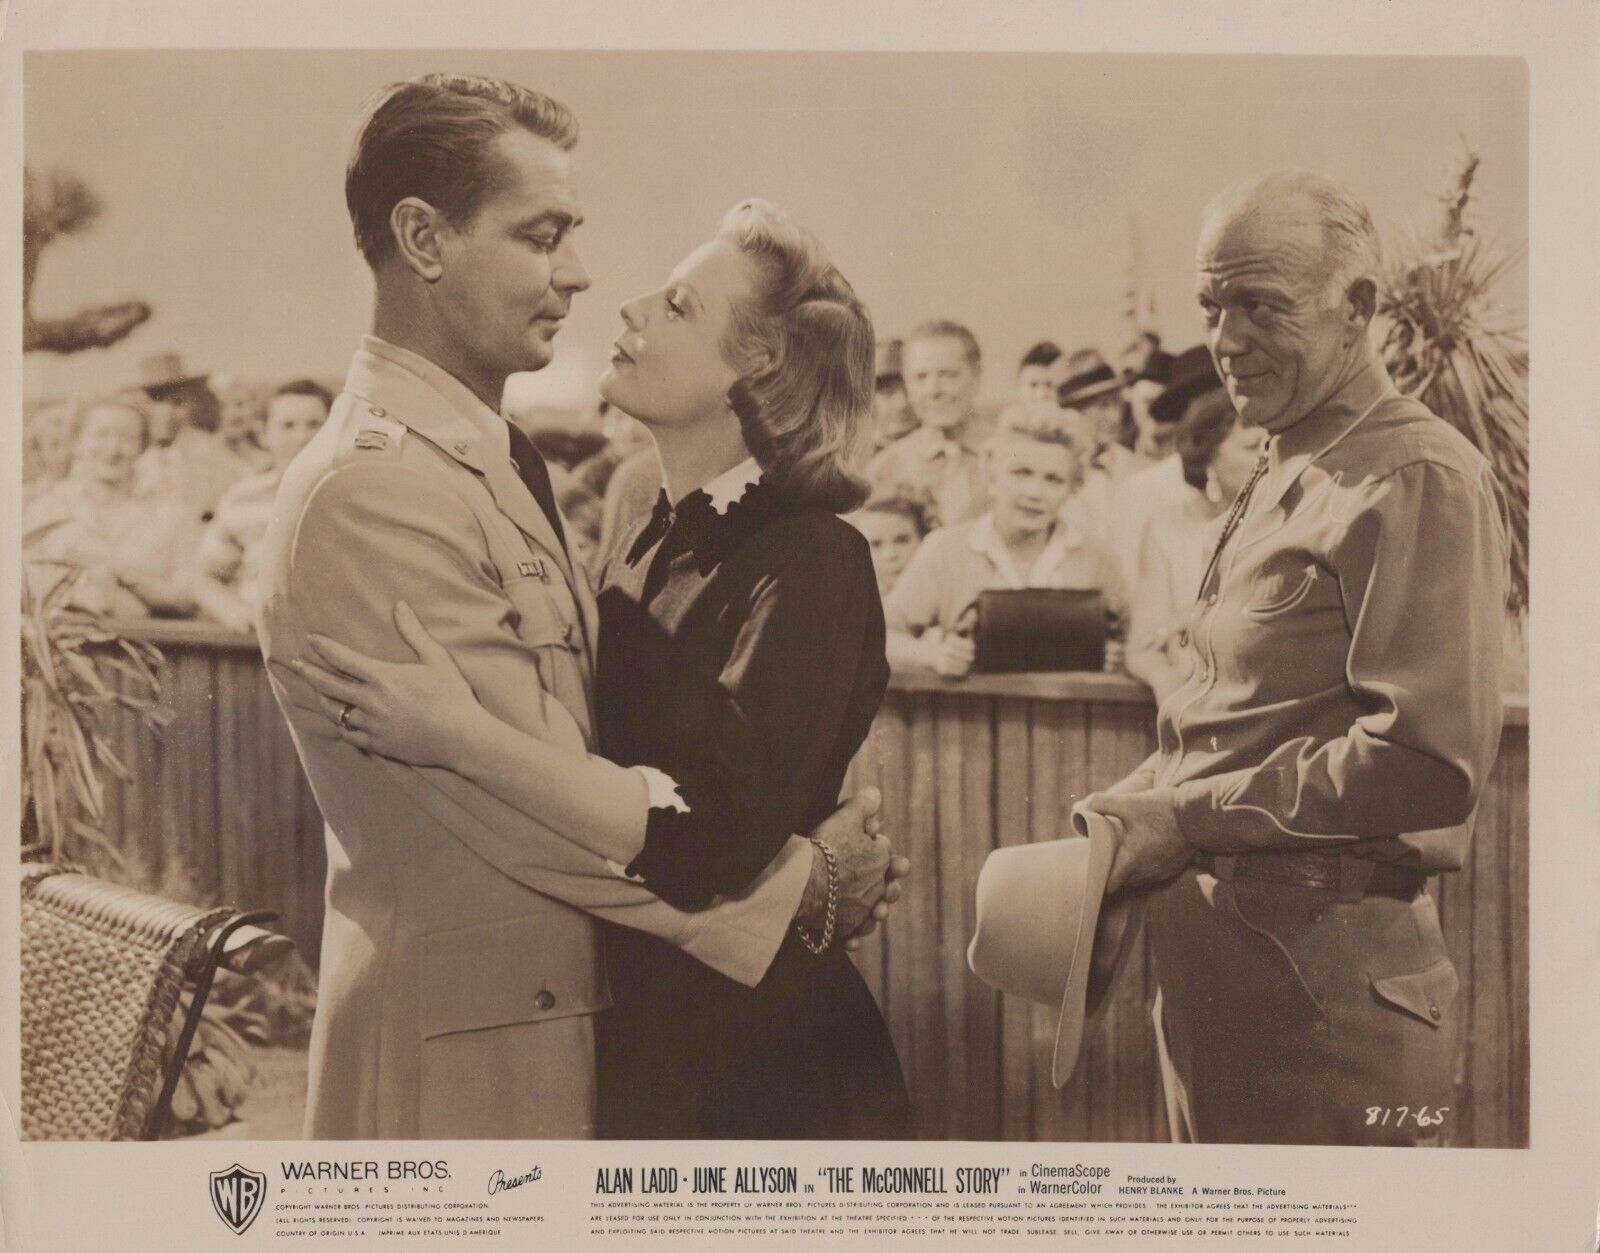 Alan Ladd + June Allyson in The McConnell Story (1955) ❤ Vintage WB Photo K 498